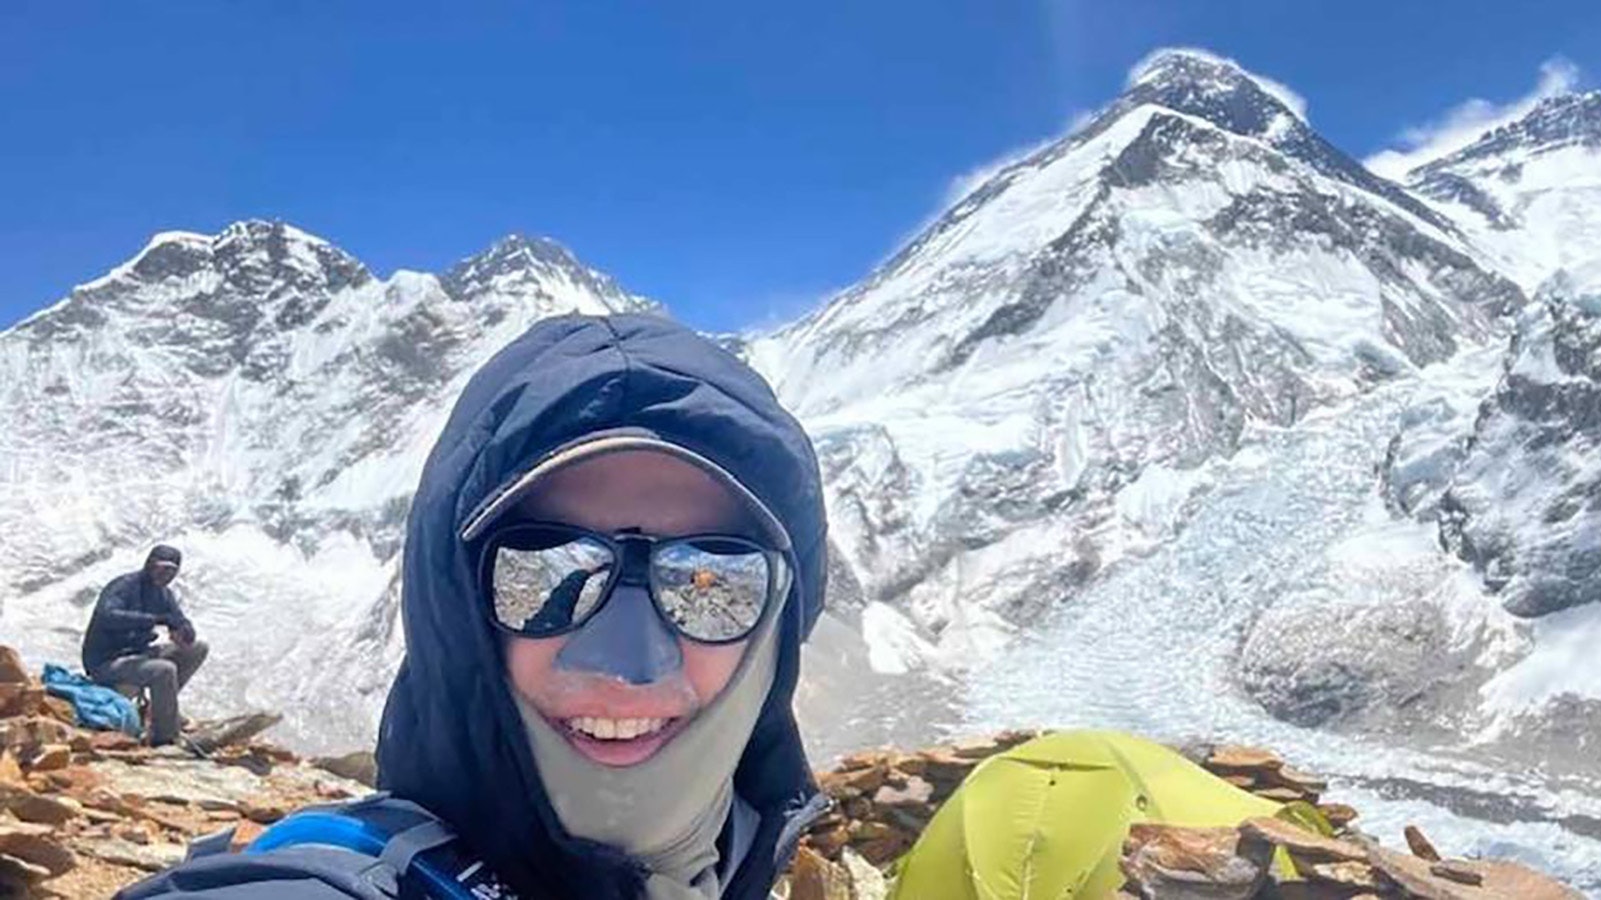 Casper’s Dr. Joe McGinley tried to climb the south side of Mount Everest last May. He aborted his attempt then because of crowding and deaths on the mountain.